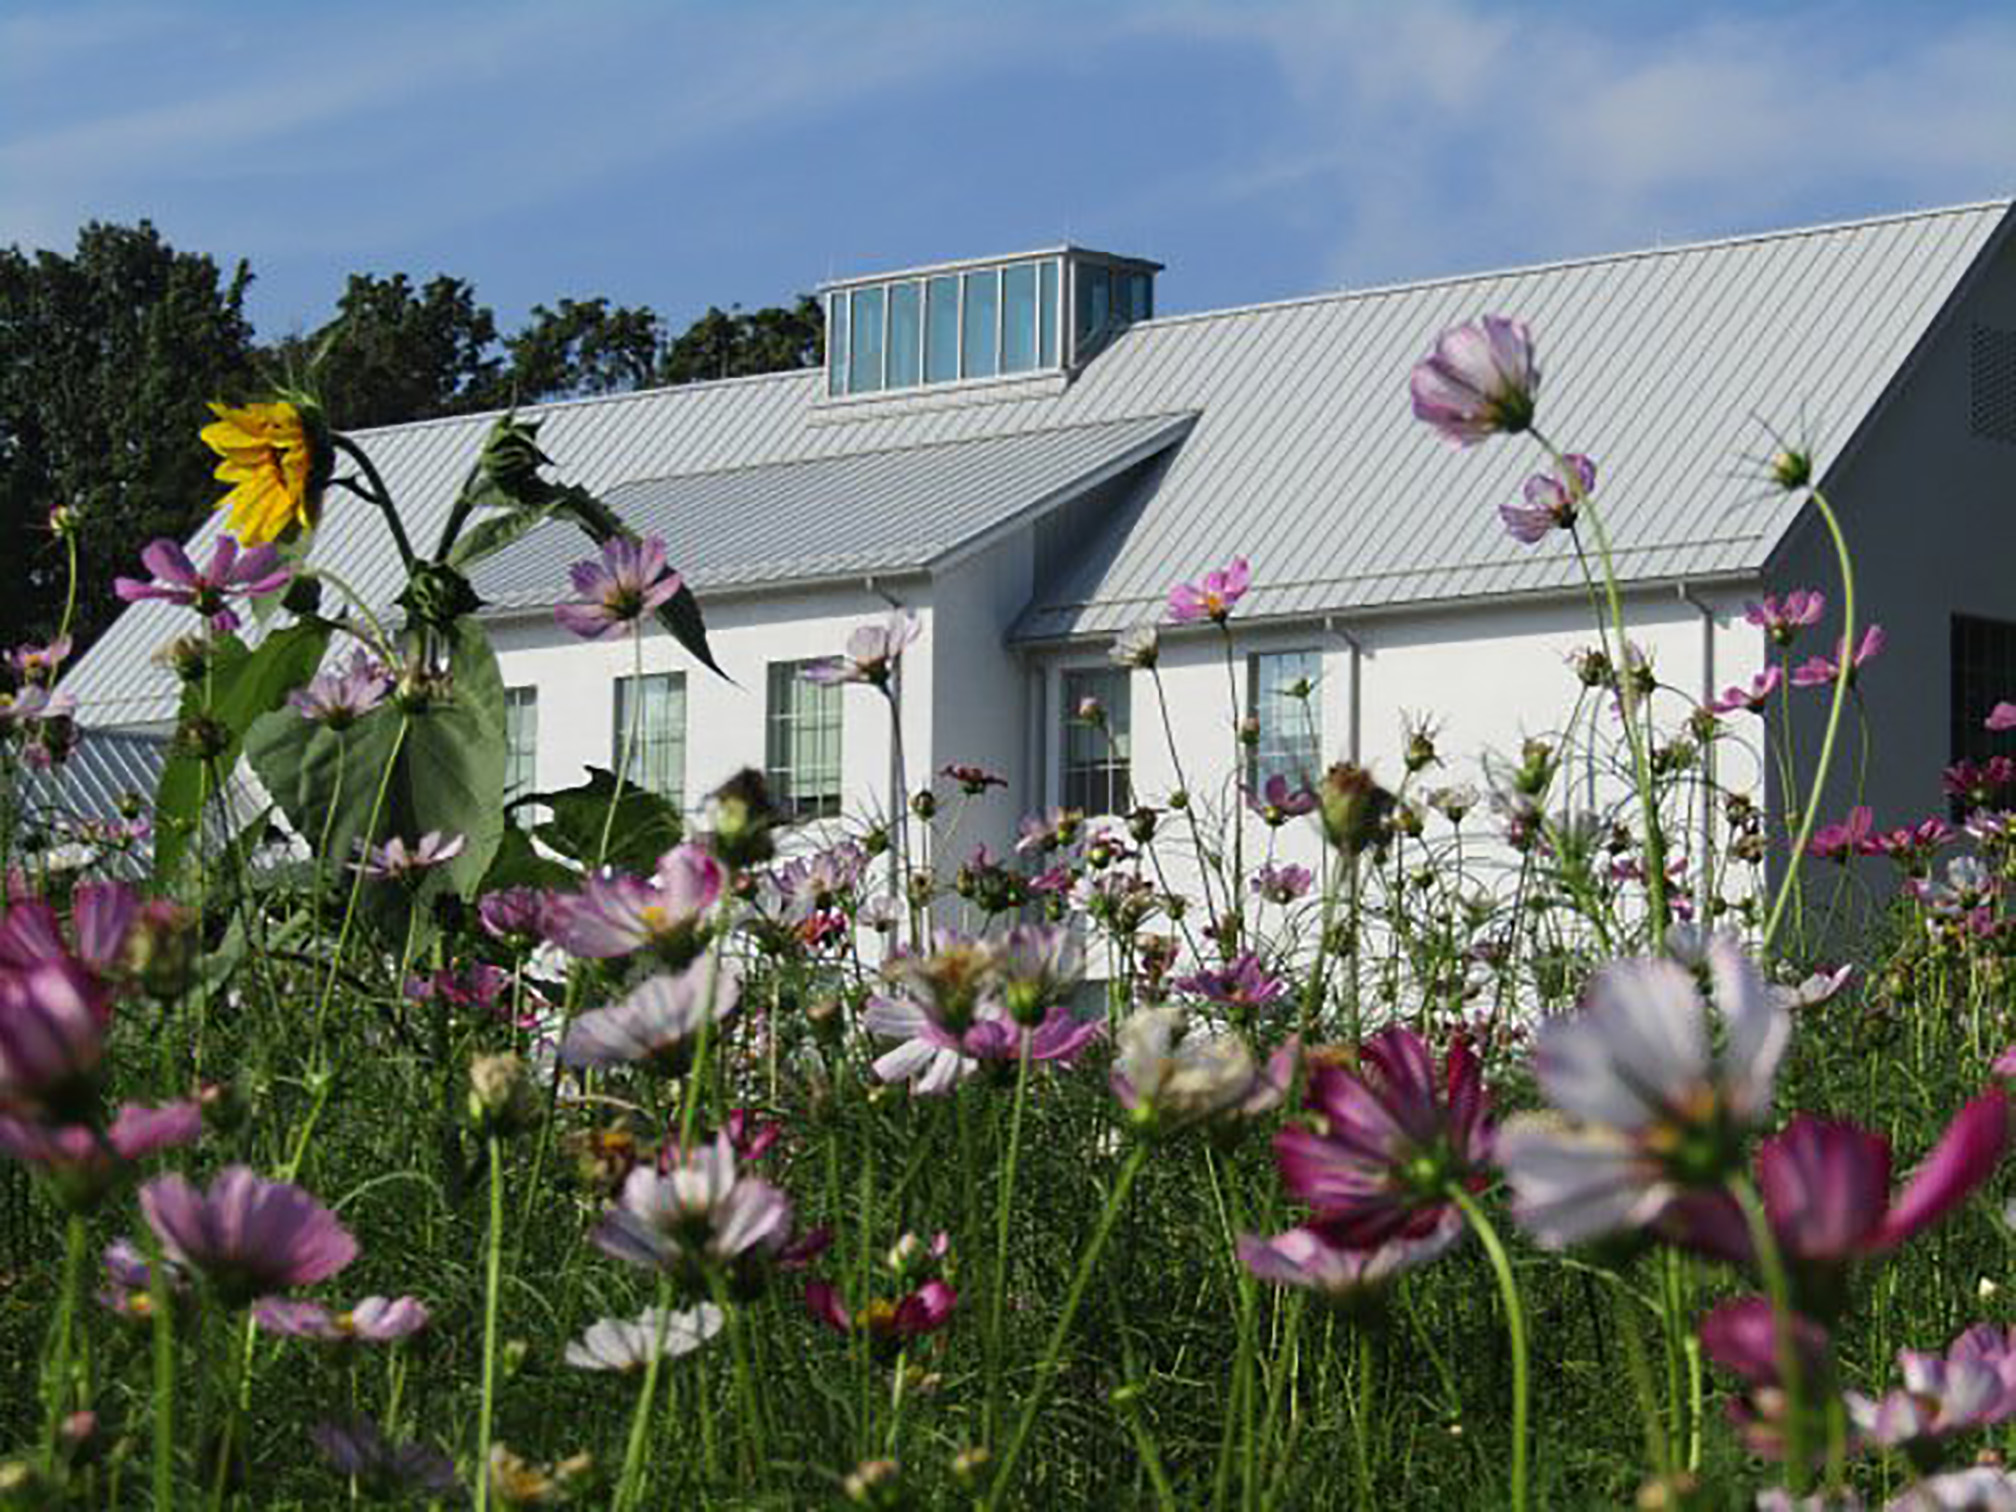 A massed planting of pink and white cosmos flowers fills the area in front of a white-painted building